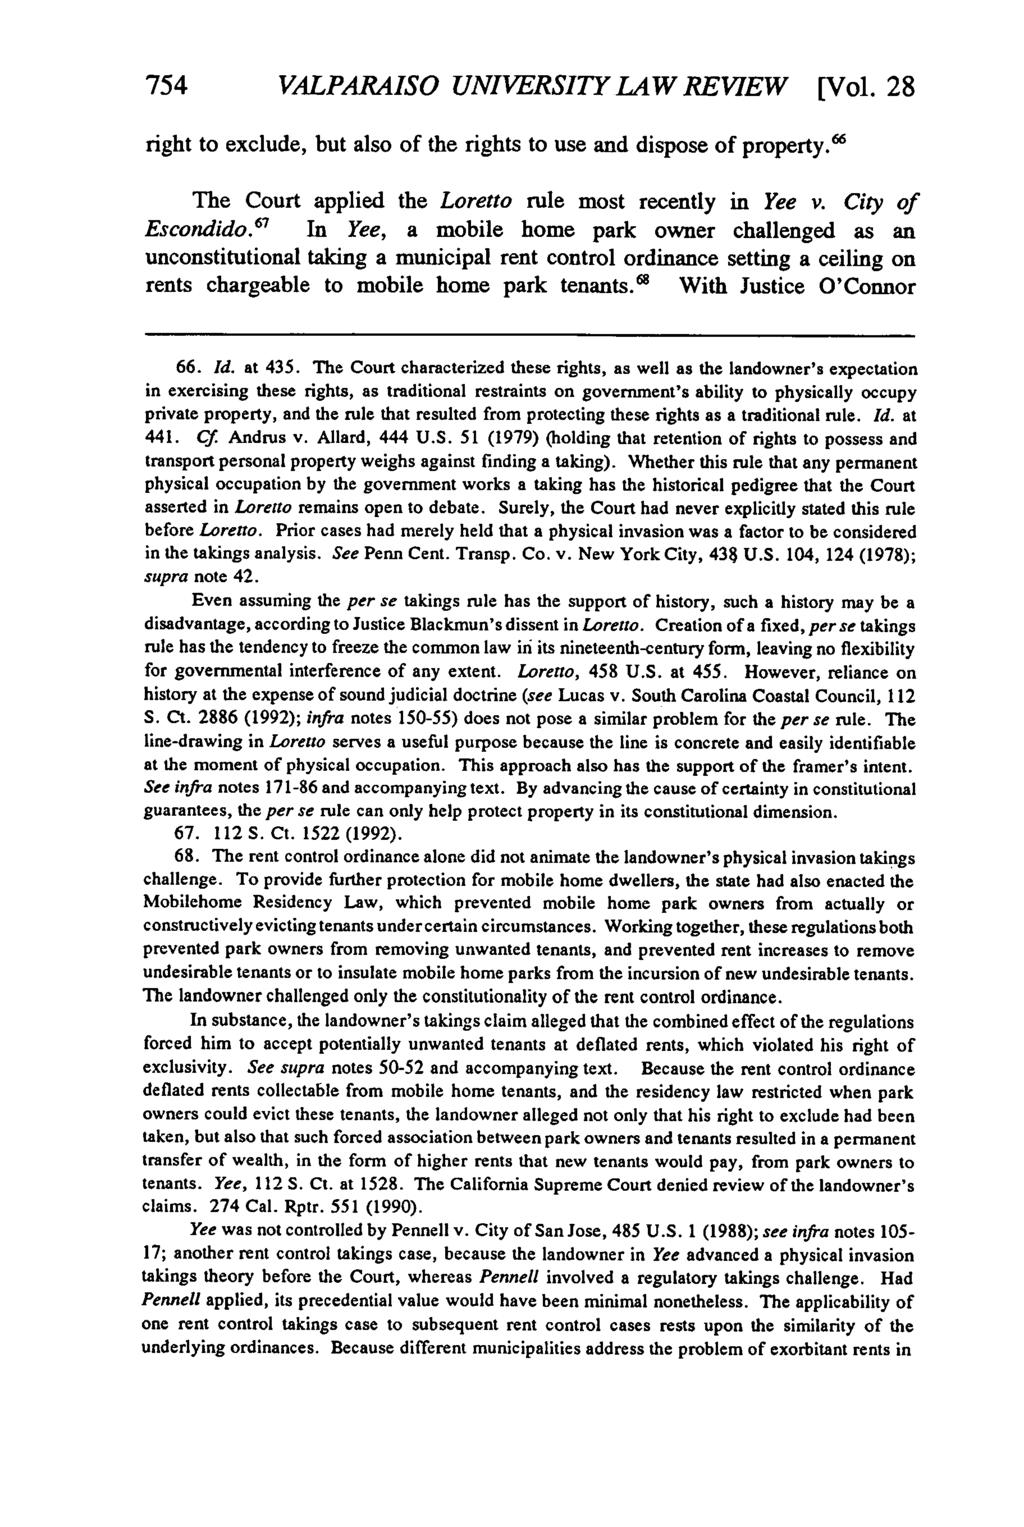 Valparaiso University Law Review, Vol. 28, No. 2 [1994], Art. 9 754 VALPARAISO UNIVERSITY LAW REVIEW [Vol. 28 right to exclude, but also of the rights to use and dispose of property.